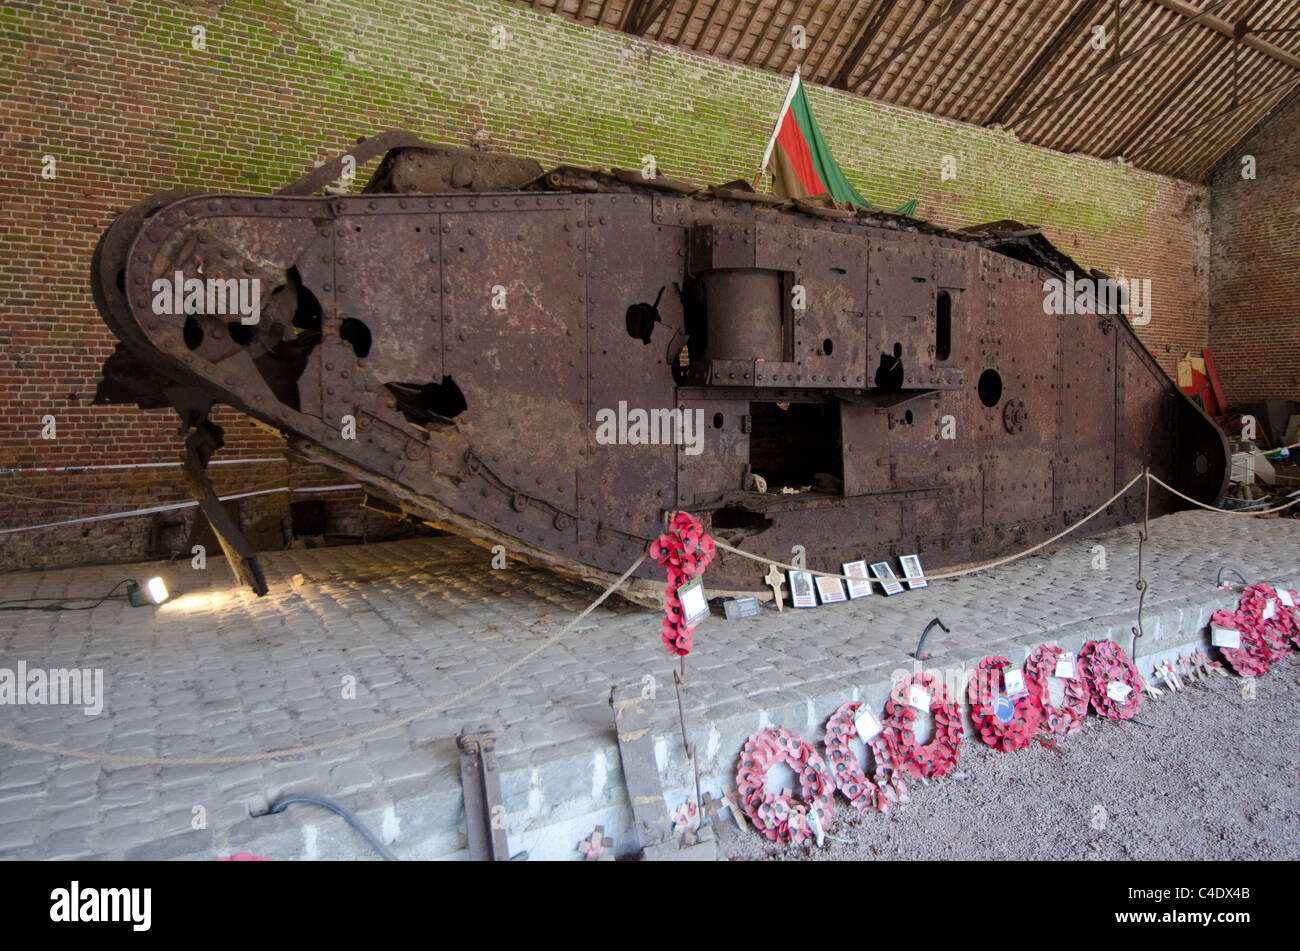 Destroyed First World War British tank on display in France Stock Photo